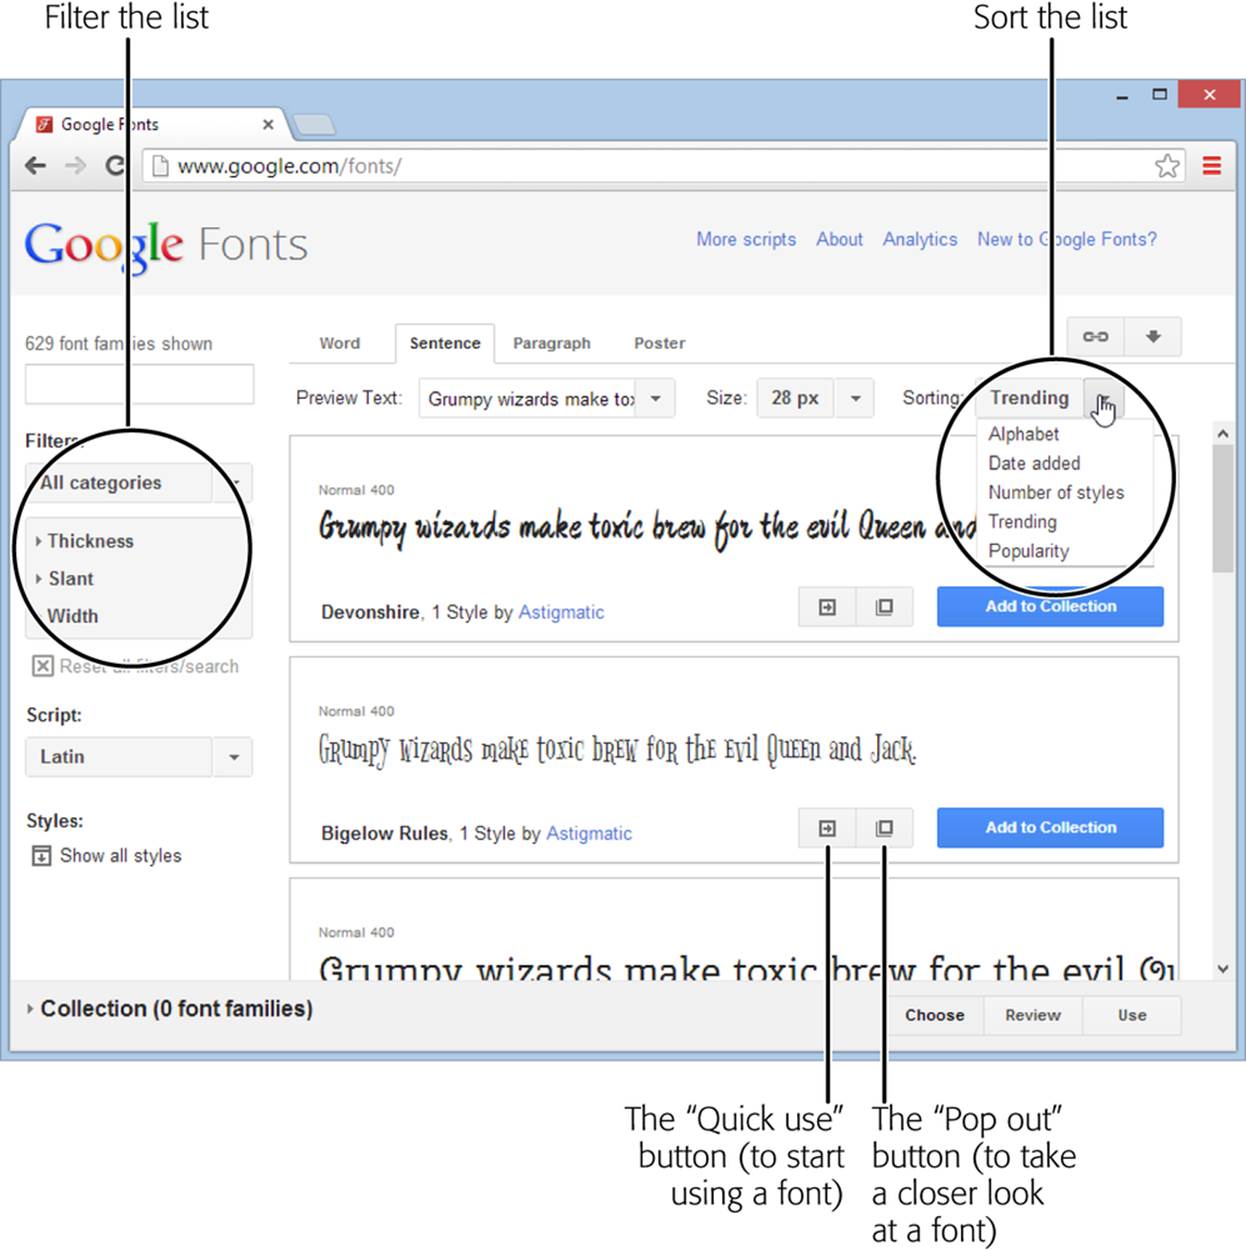 Google Fonts offers a relentlessly expanding selection of typefaces. When you look for a font, you probably want to tweak the font list’s sorting and filtering options (circled). For example, you can sort alphabetically or put the most popular fonts first, and you can pare the results to just serif, sans-serif, or handwritten (cursive) fonts